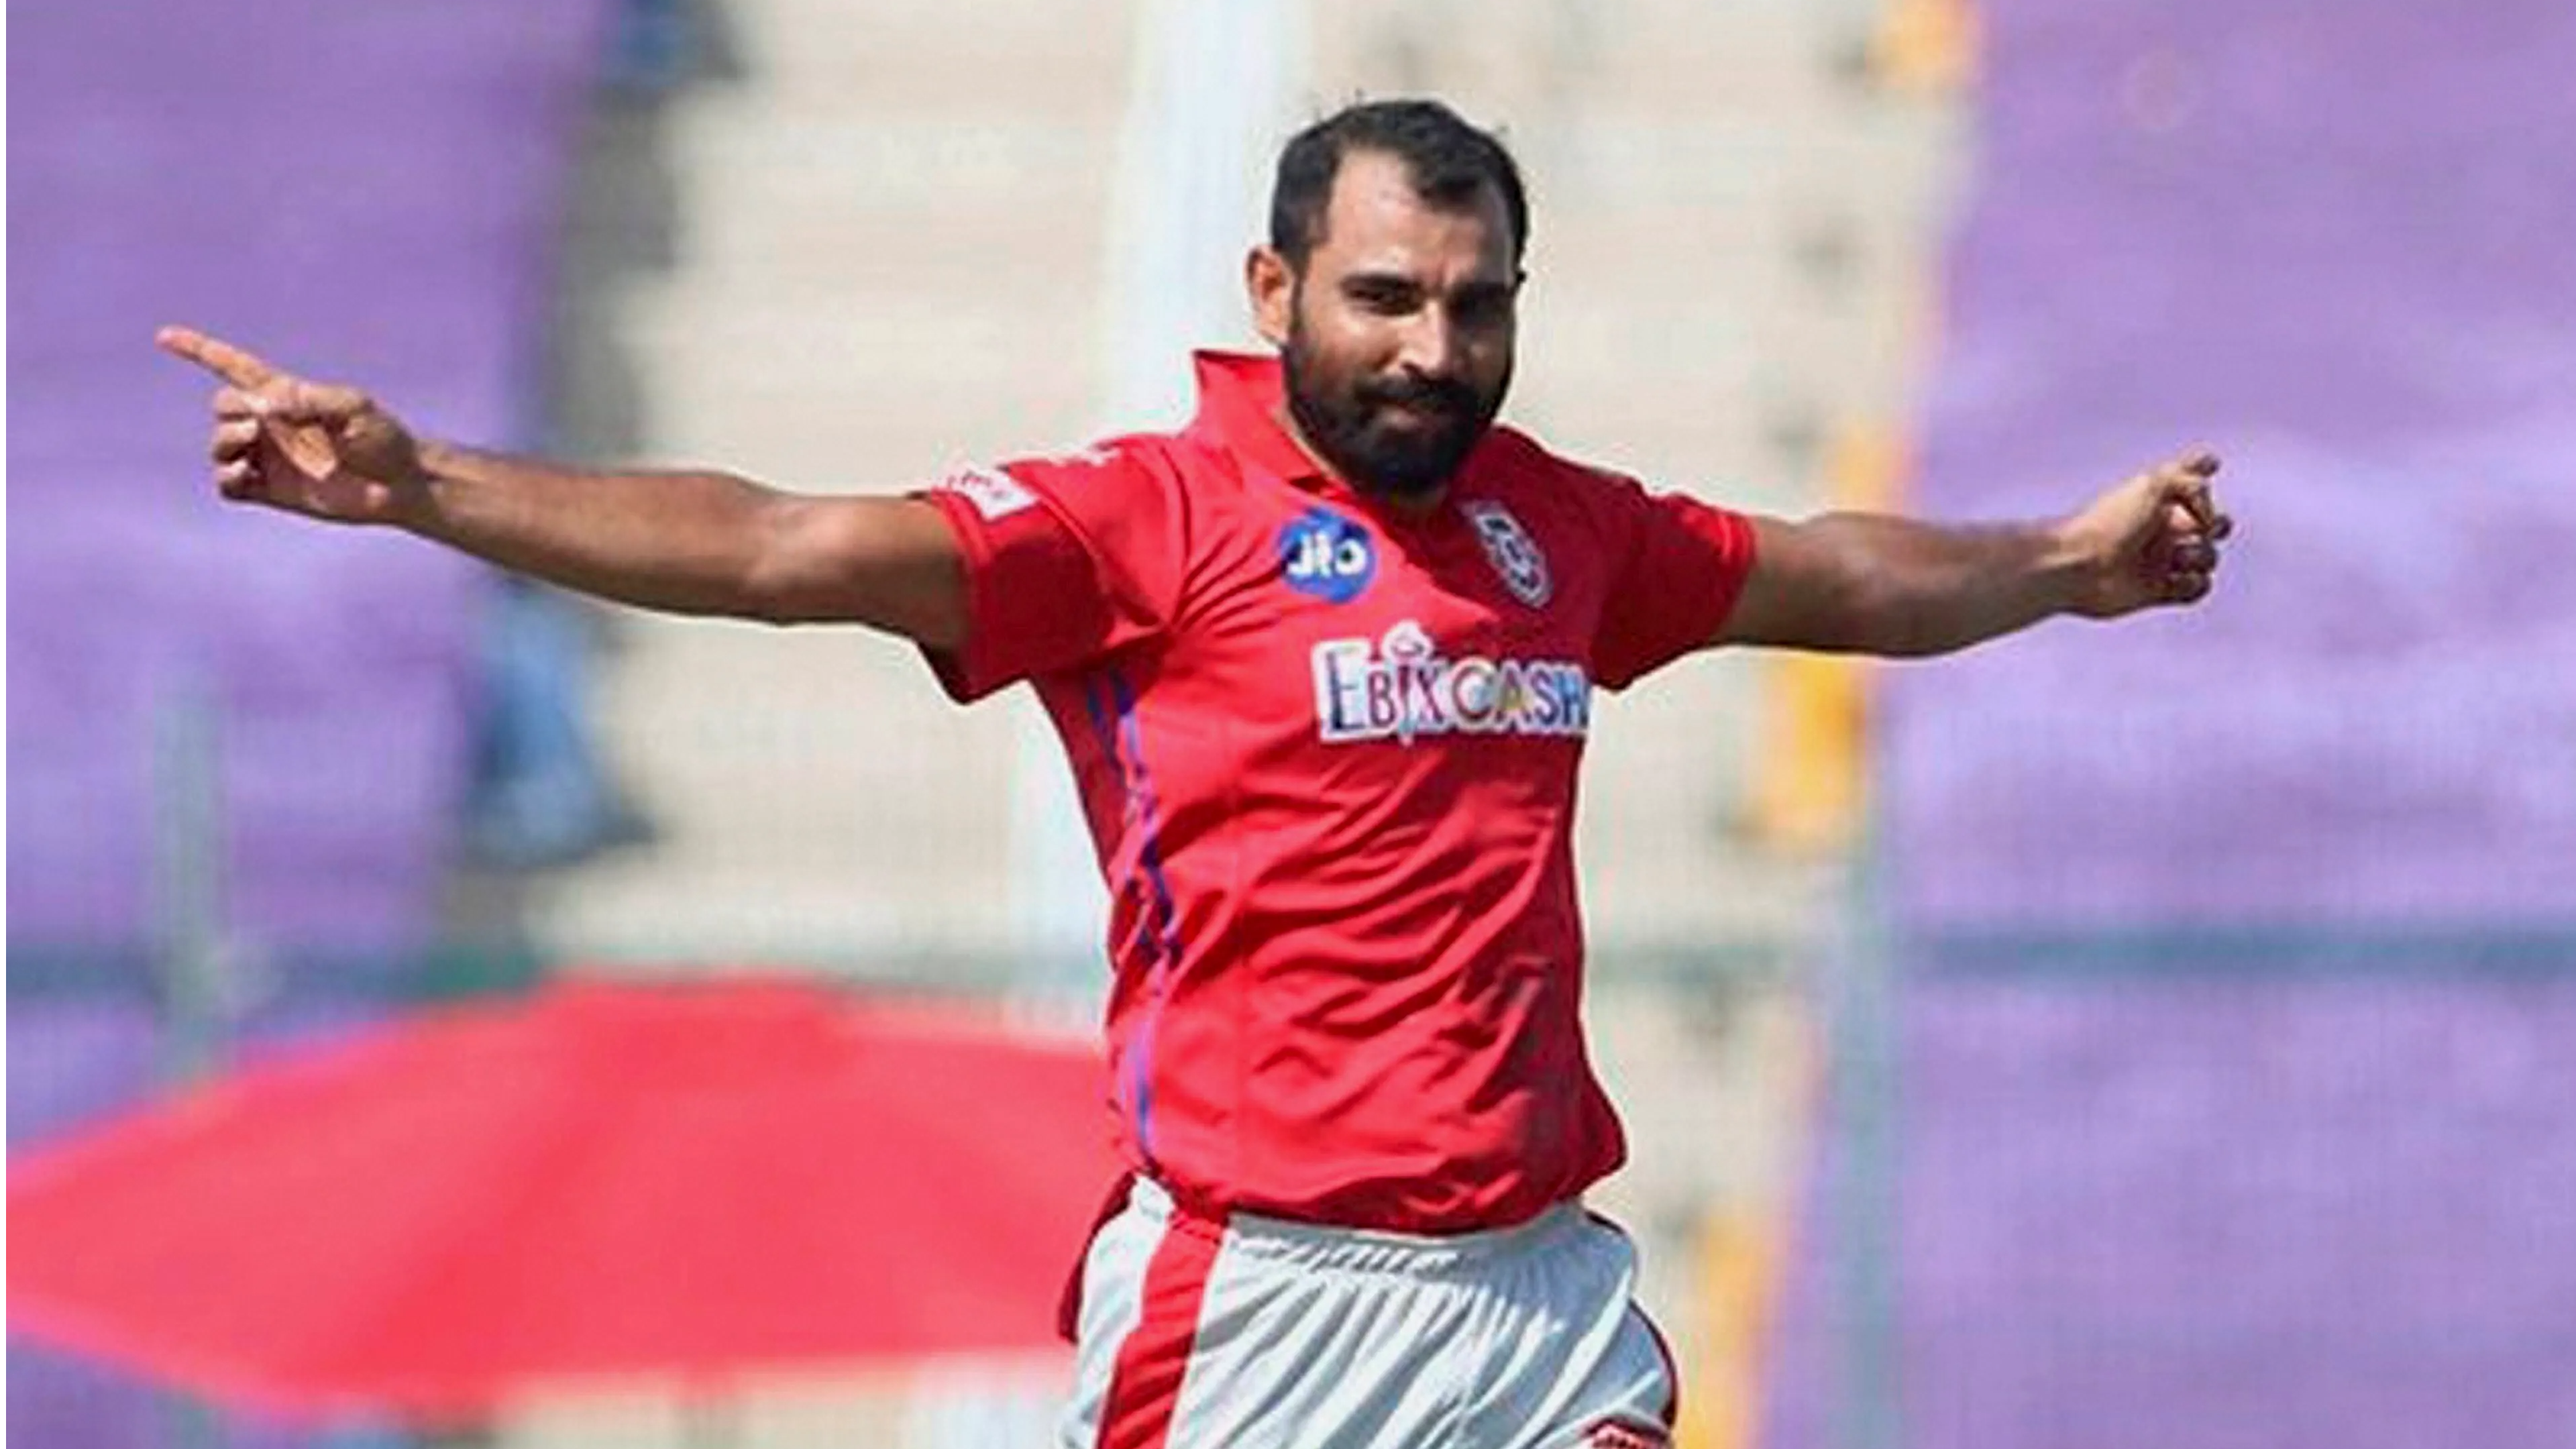 Mohammed Shami was clear on bowling six yorkers in Super Over: KXIP skipper KL Rahul